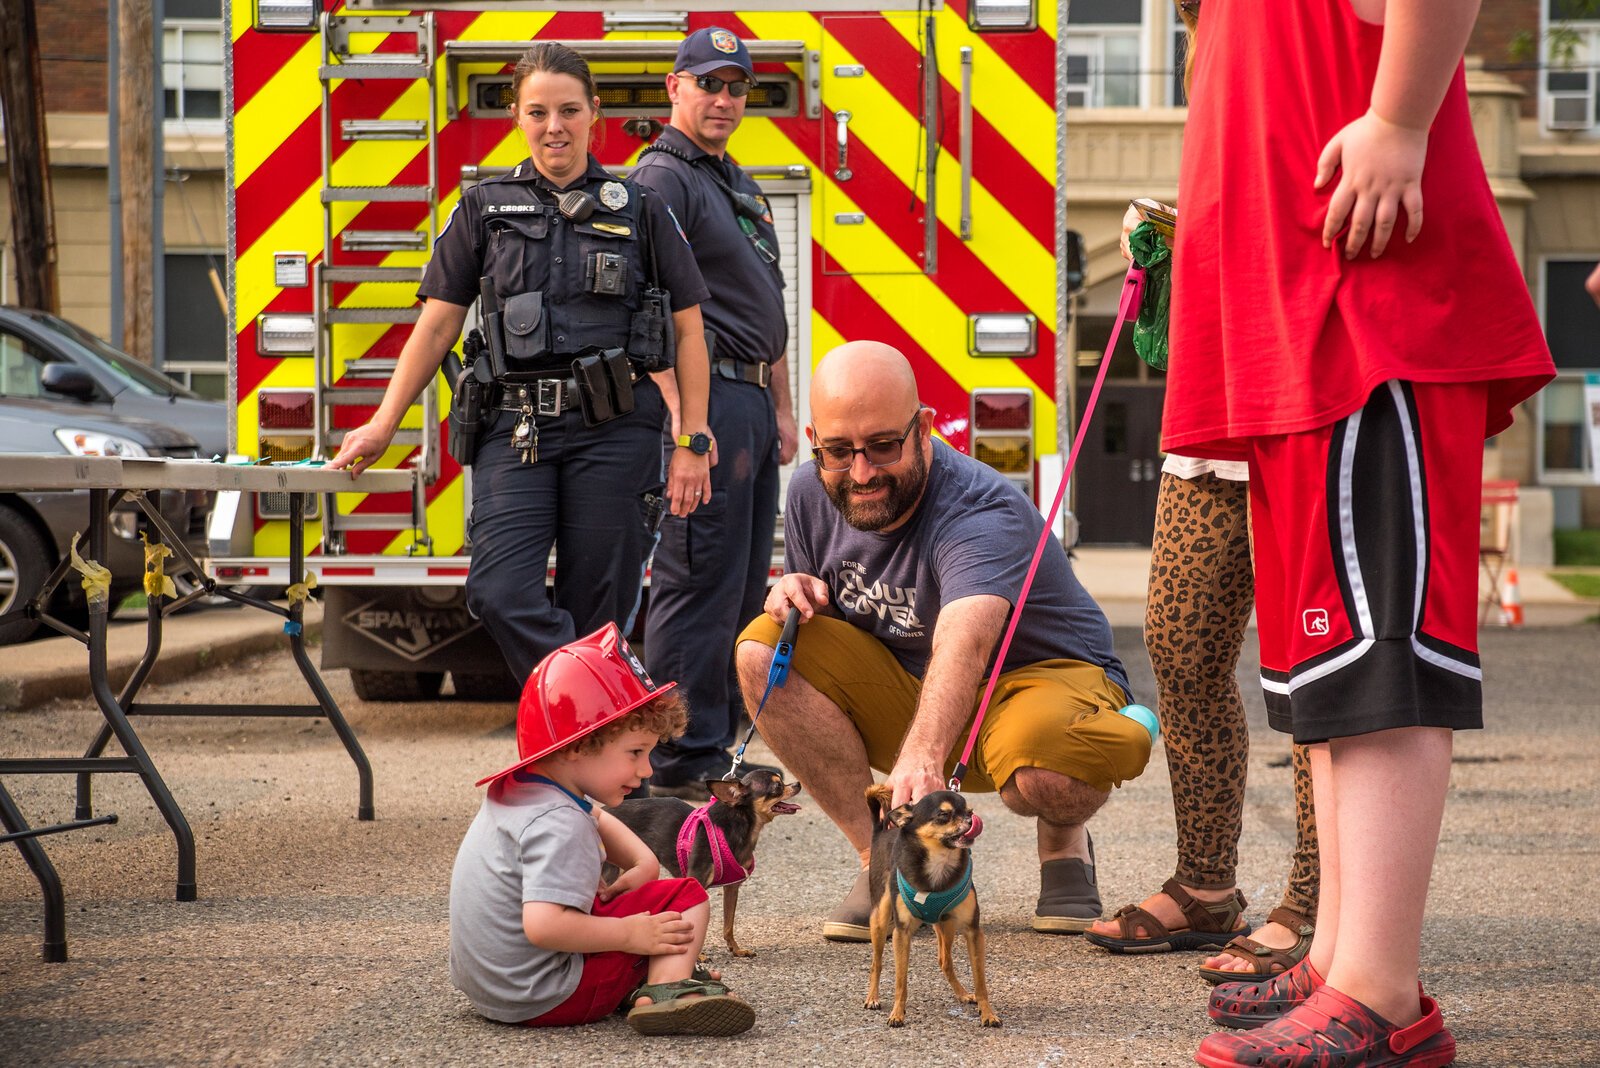 National Night Out was celebrated on August 1 in several neighborhoods throughout the city as a day to celebrate the community and for residents, public safety officers, and emergency personnel to meet each other socially. This is in Vine.